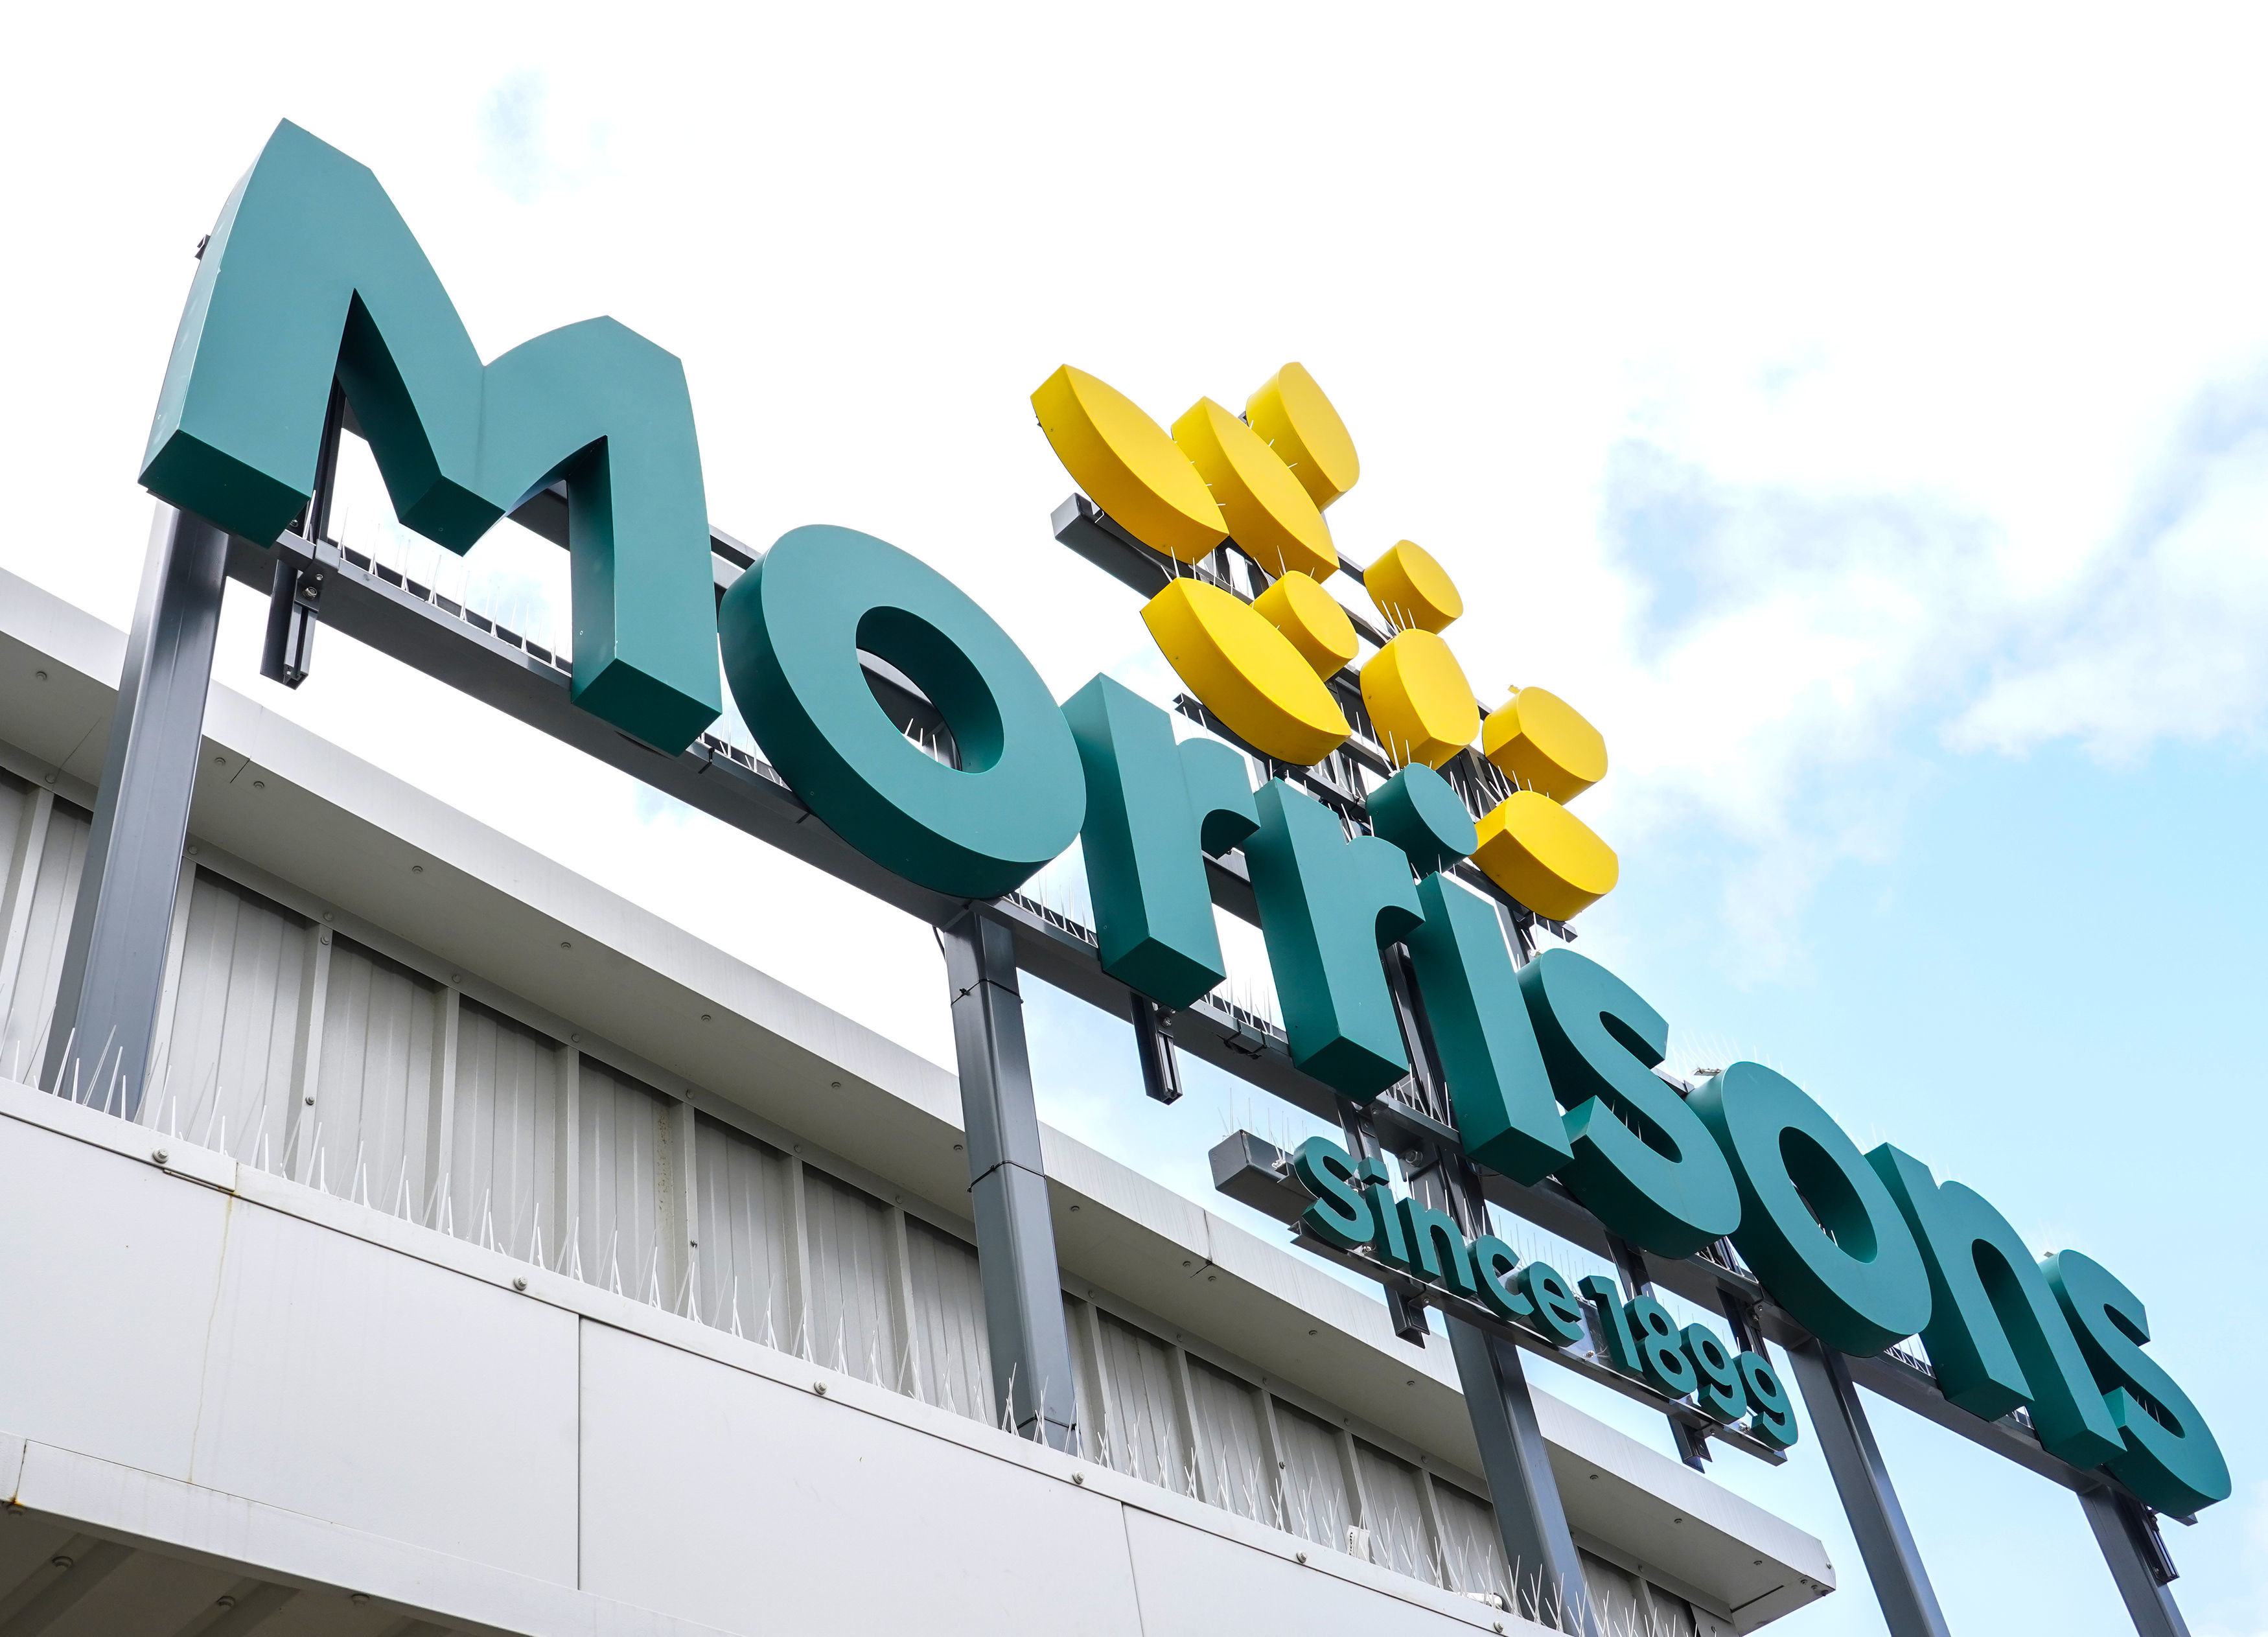 Morrisons has become a serious rival for Aldi and Lidl following its latest change